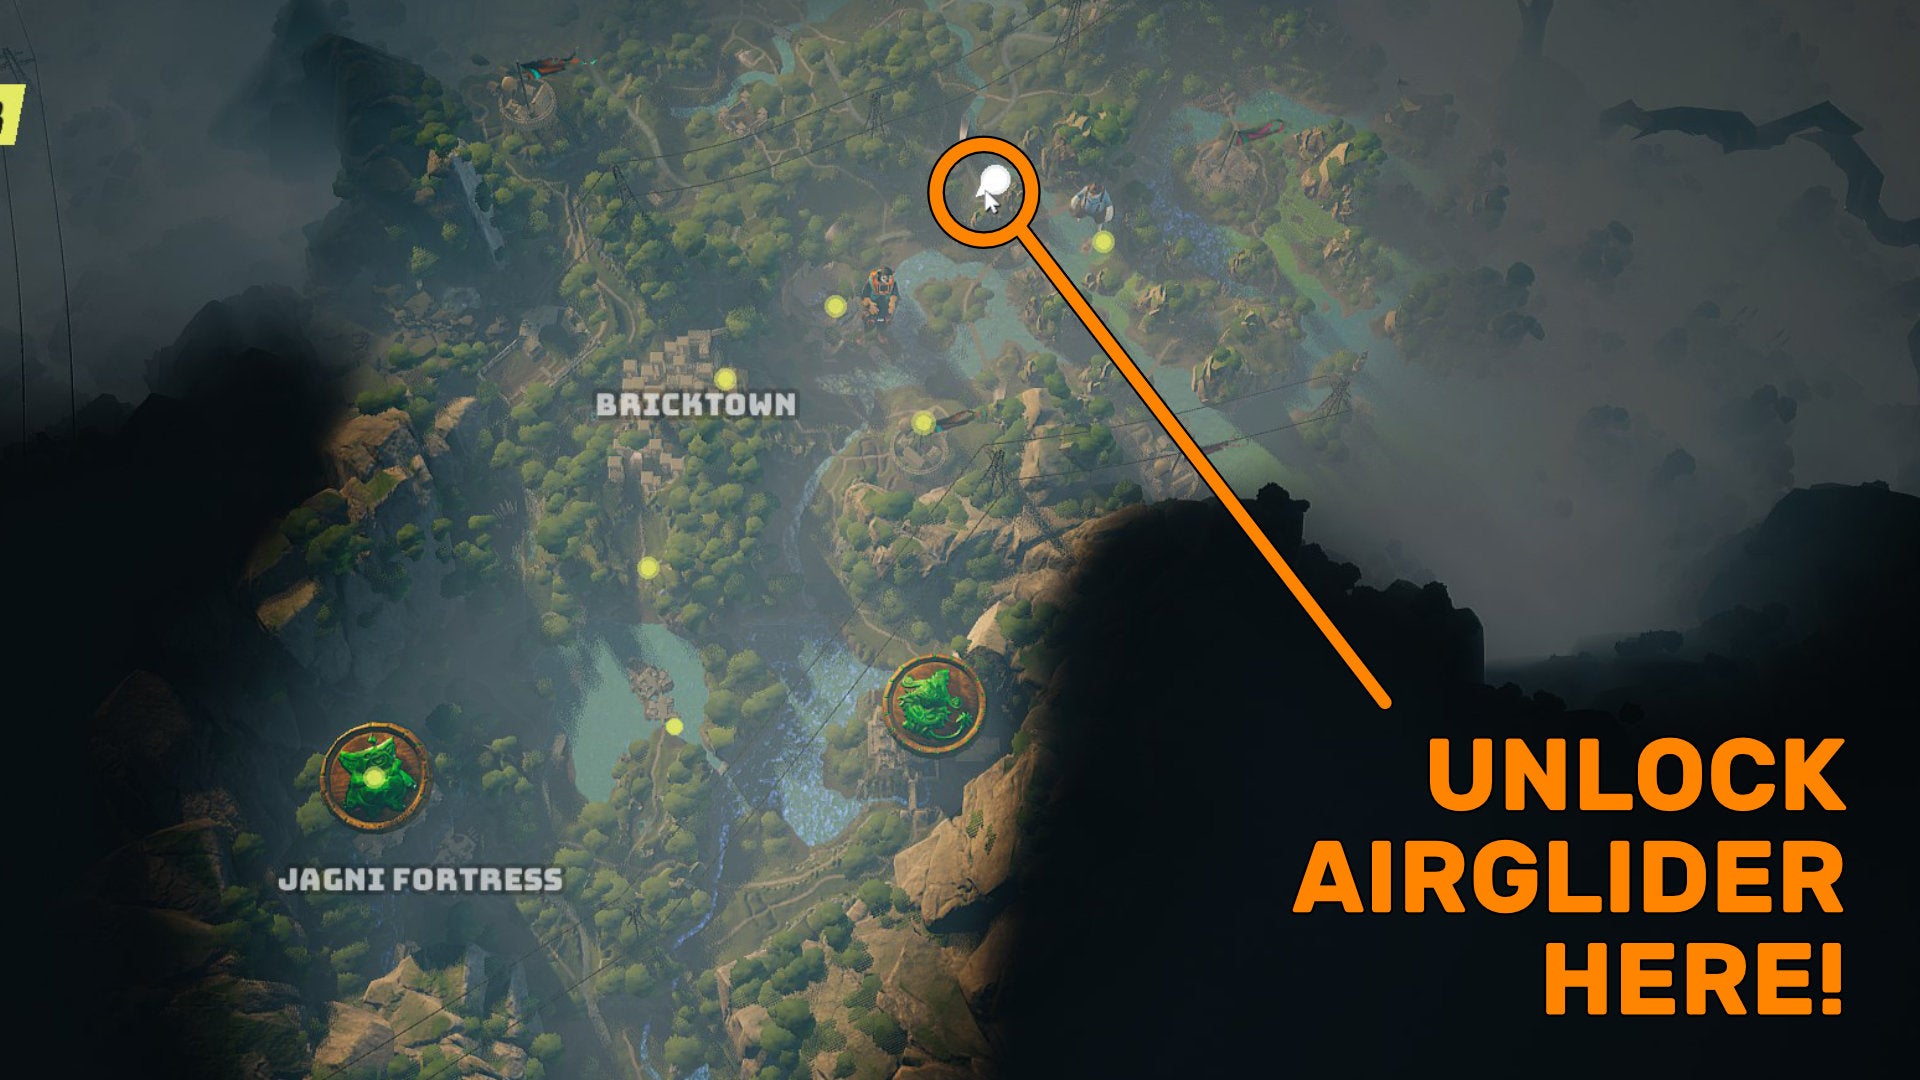 A screenshot of part of the Biomutant map, with a "mirage" side quest location highlighted where you can unlock the Airglider automaton upgrade.